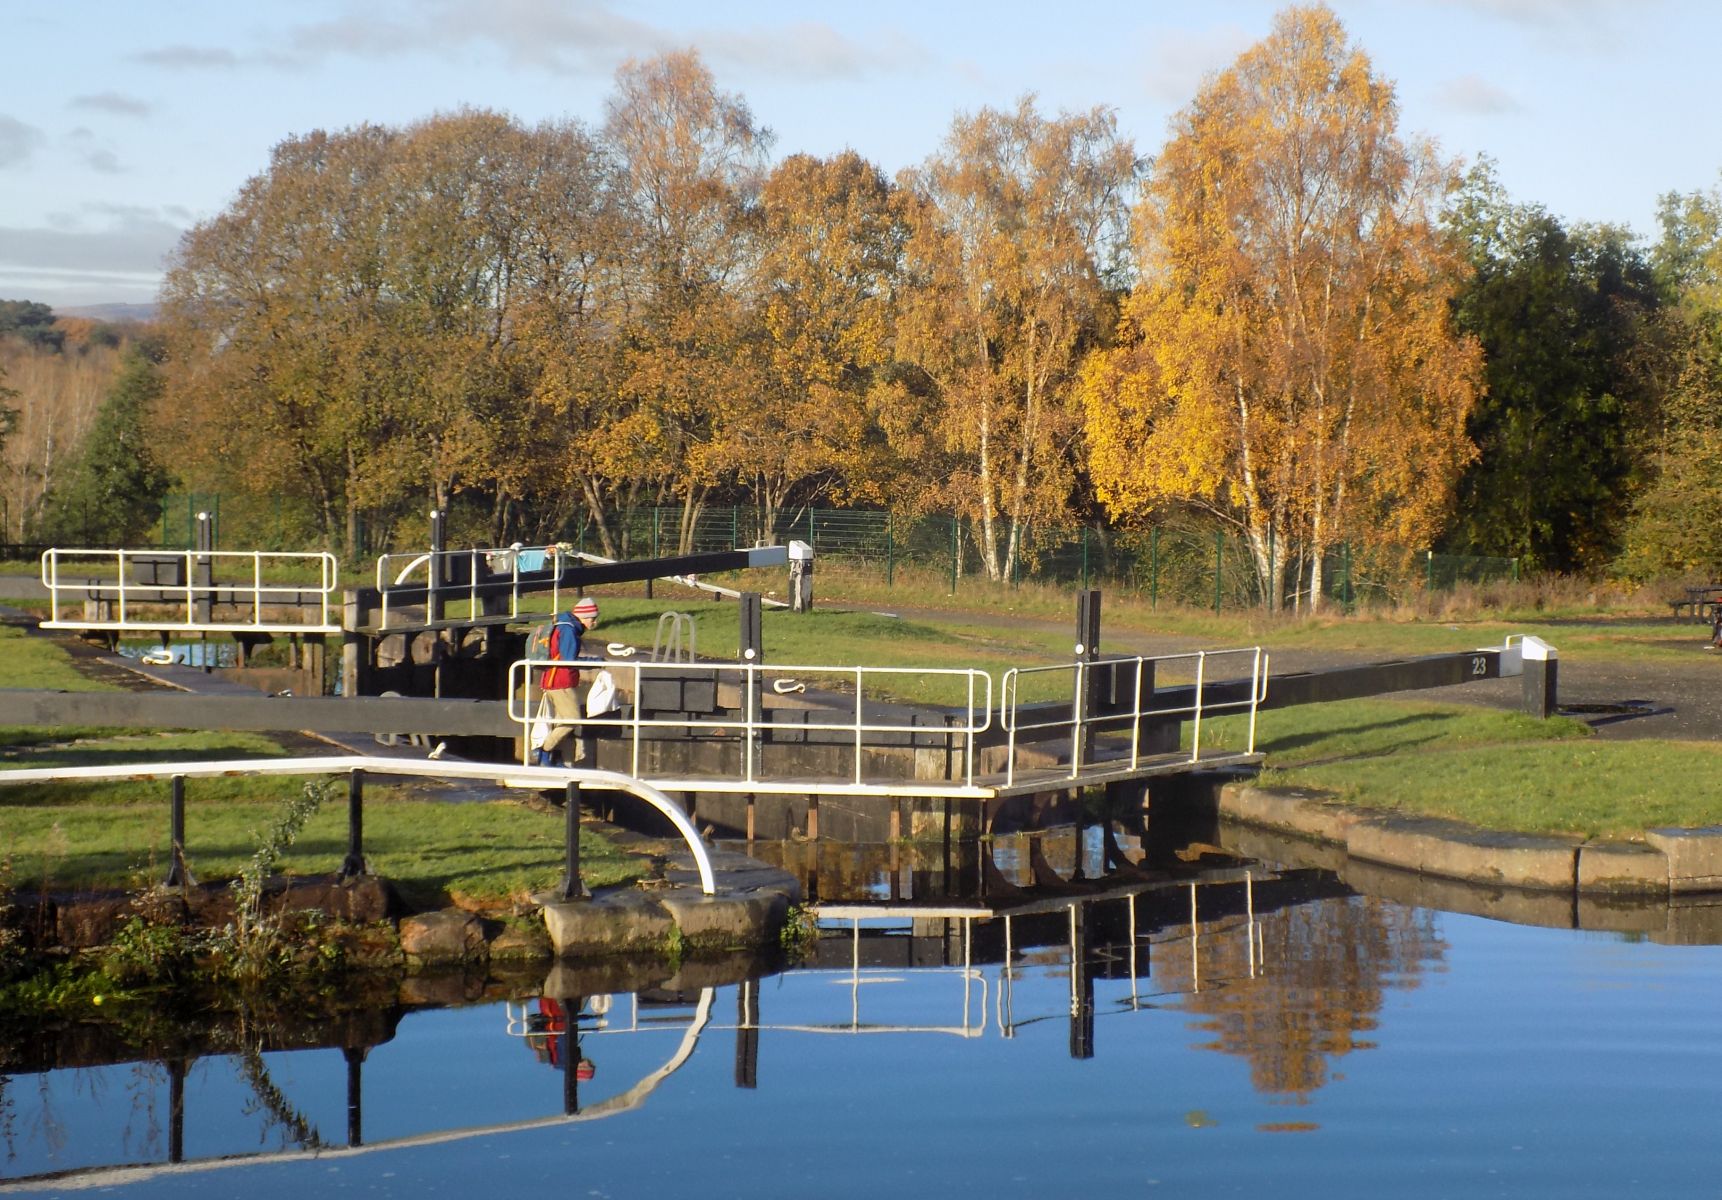 Locks on Forth & Clyde Canal in Maryhill